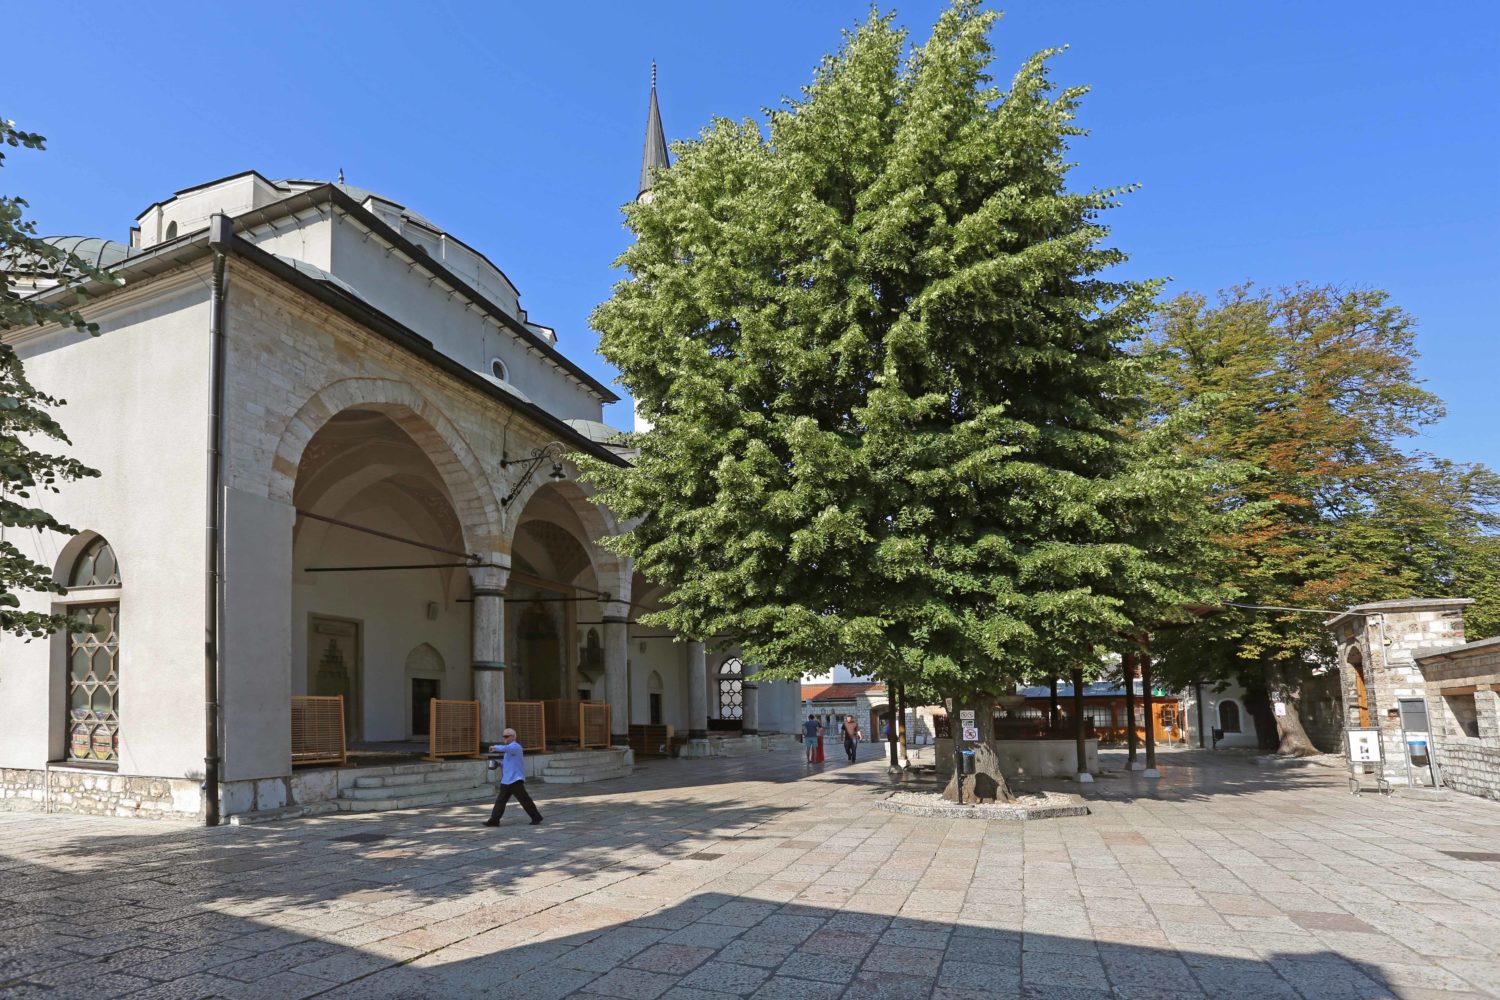 The courtyard of Gazi Husrev-bey Mosque in Sarajevo, with a tree in the foreground and the mosque's arched entrance visible.